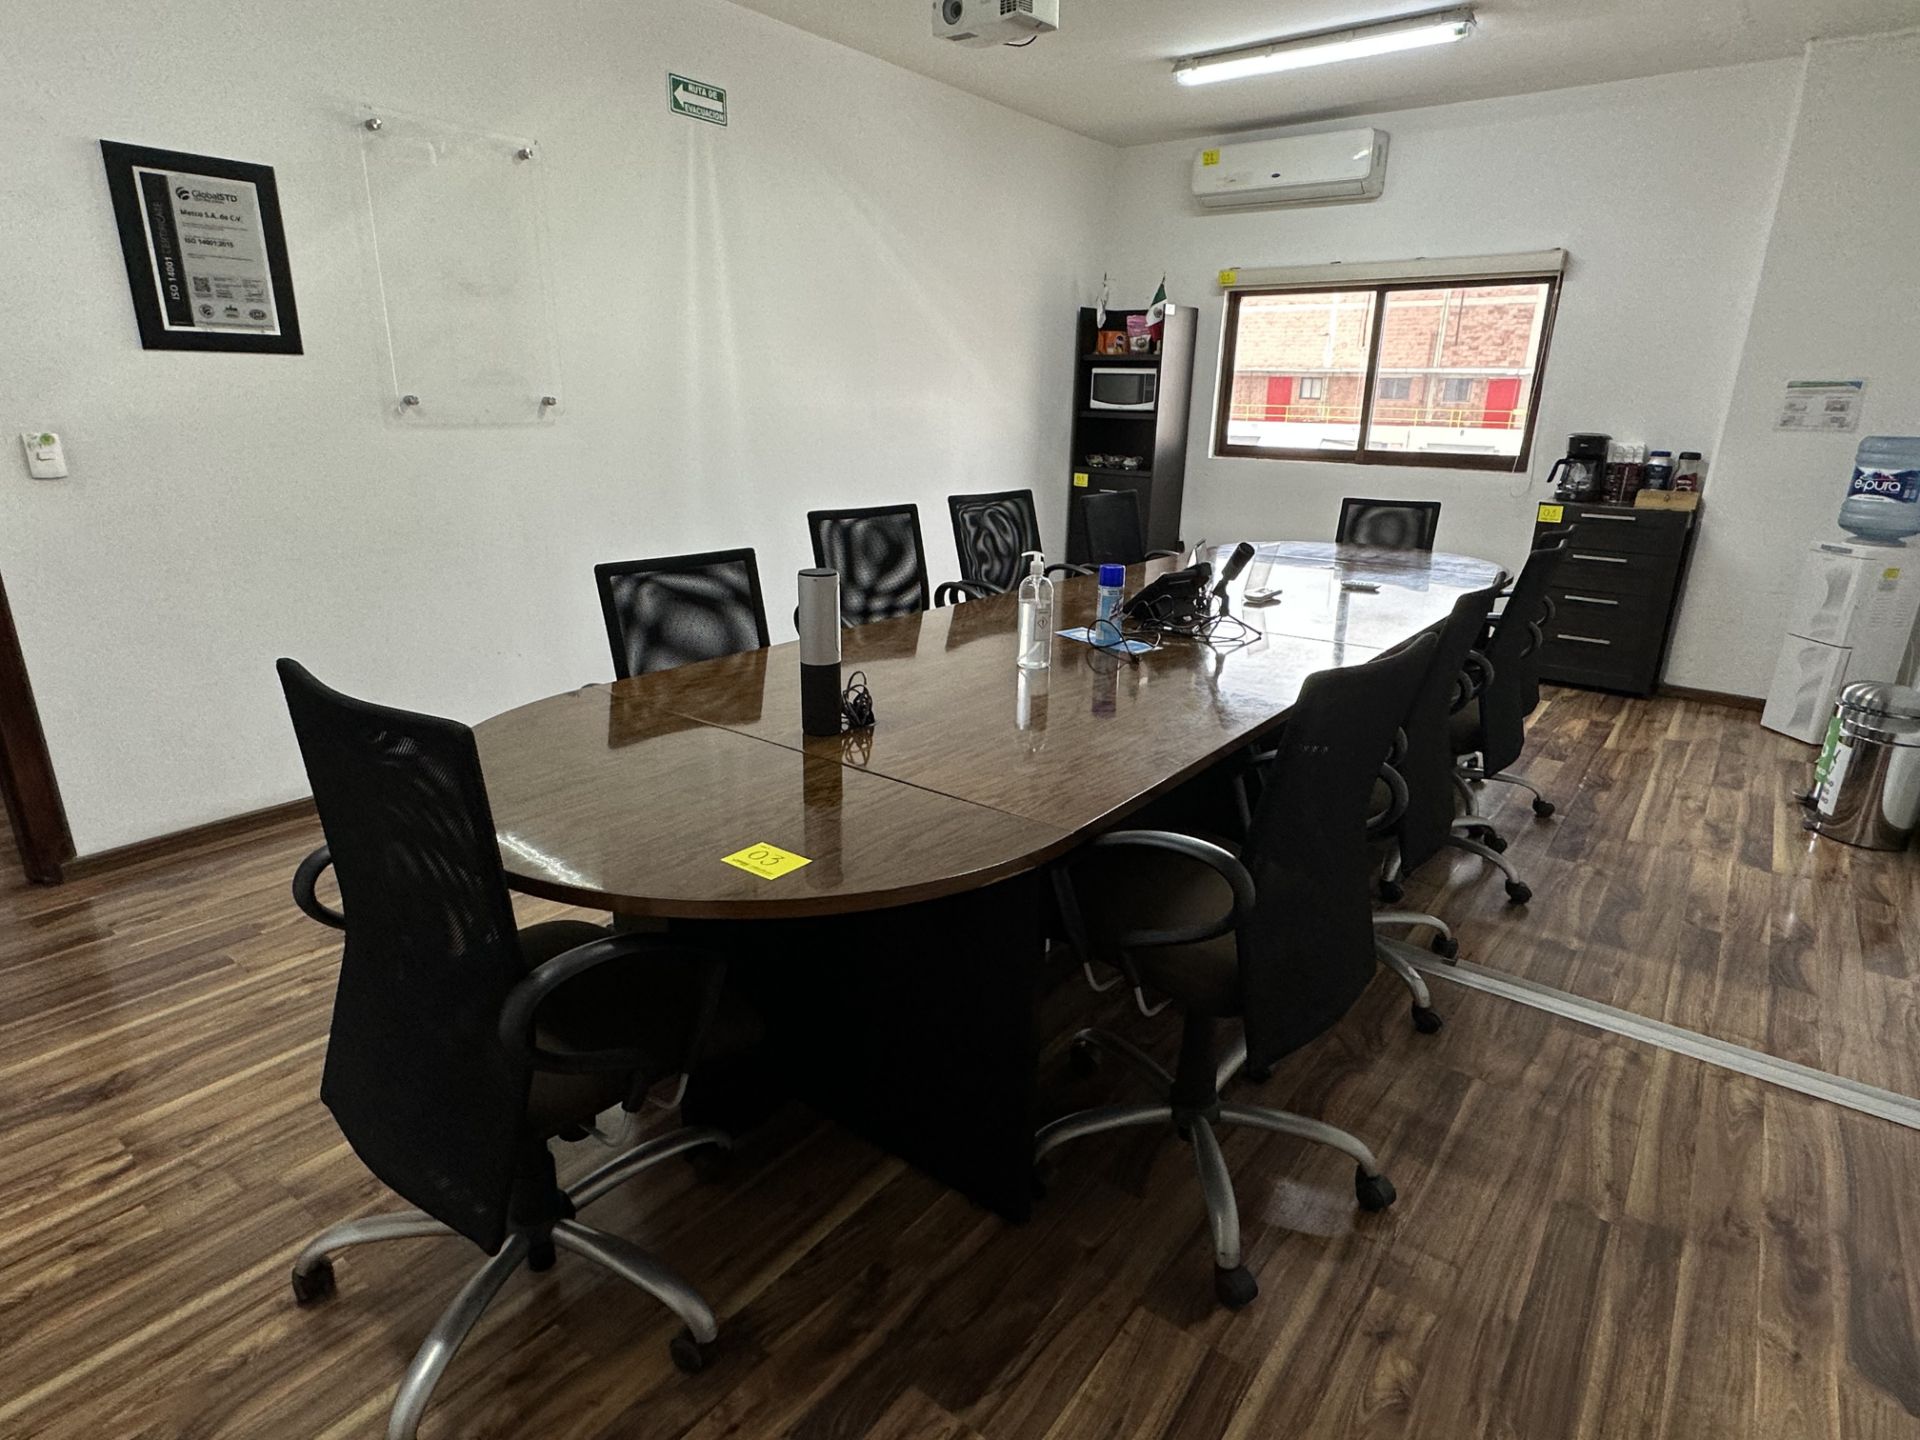 Lot of office furniture includes: 1 Boardroom table in brown wood measuring approximately 4.30 x 1. - Image 4 of 18